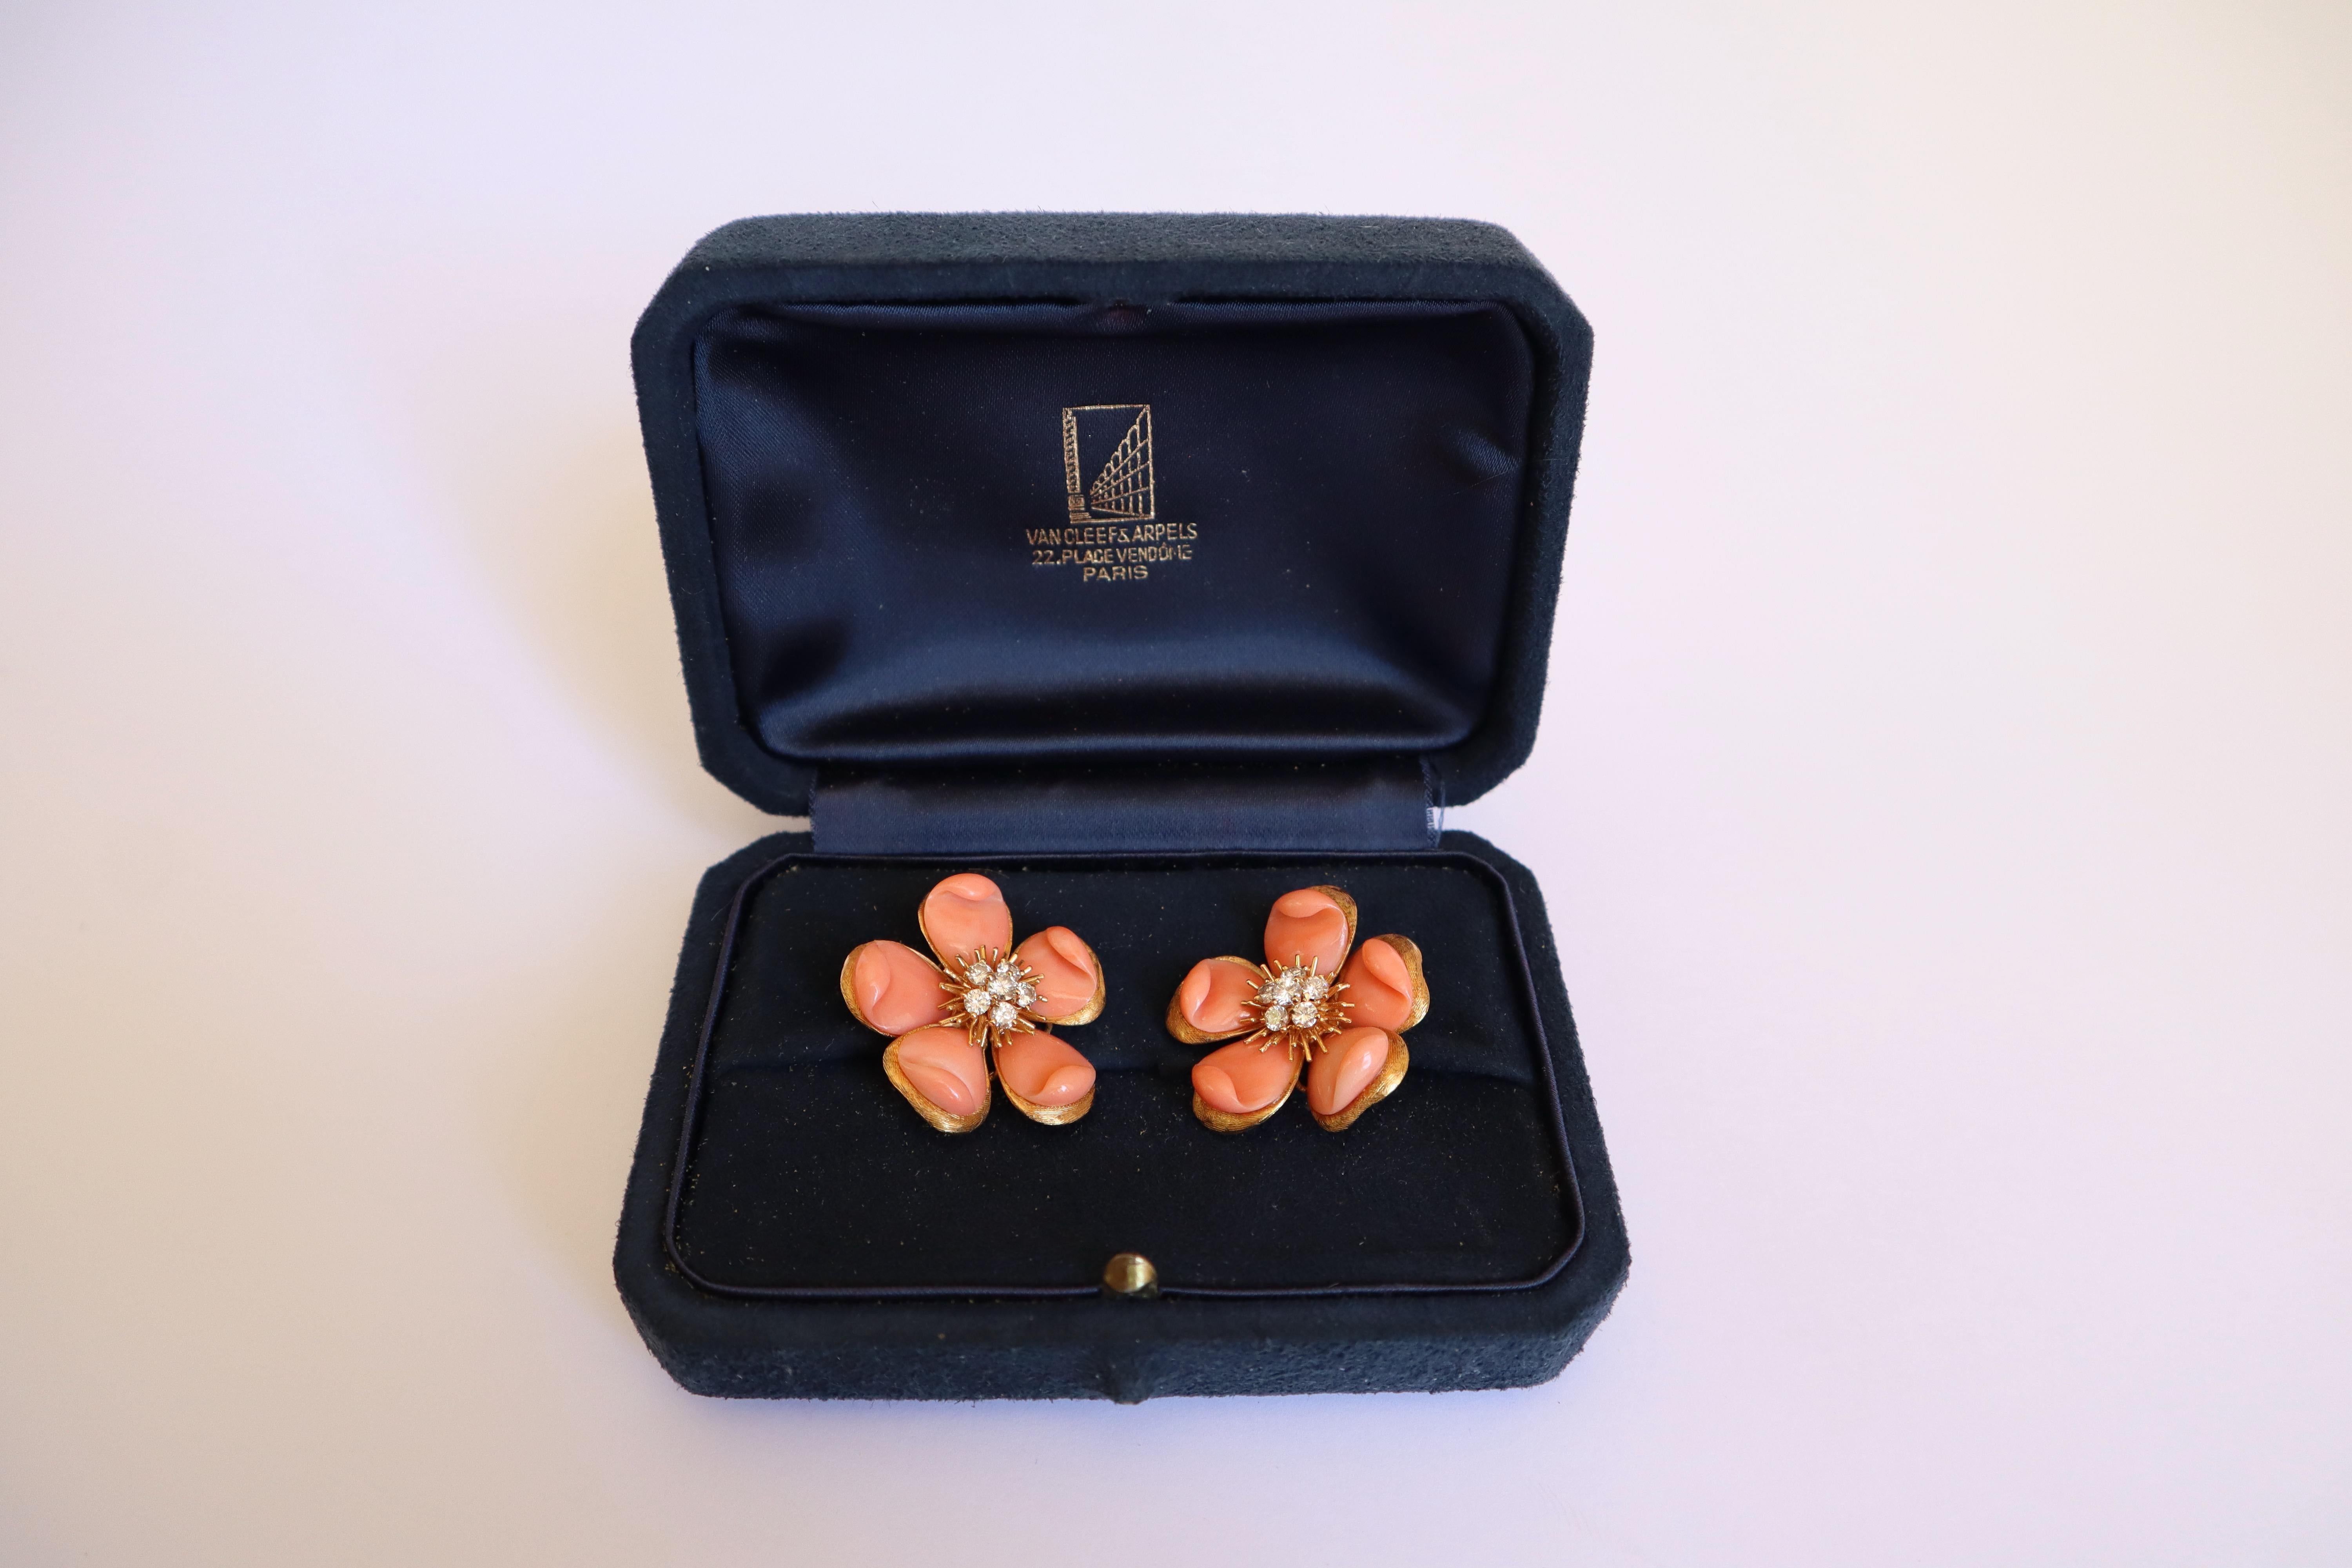 VAN CLEEF AND ARPELS Rose de Noel Legendary 18K yellow gold ear clips in the shape of blooming flowers, the five petals in 18K yellow gold are adorned with pink coral, the heart is set with 6 brilliant-cut diamonds on each clip. Approximately 1